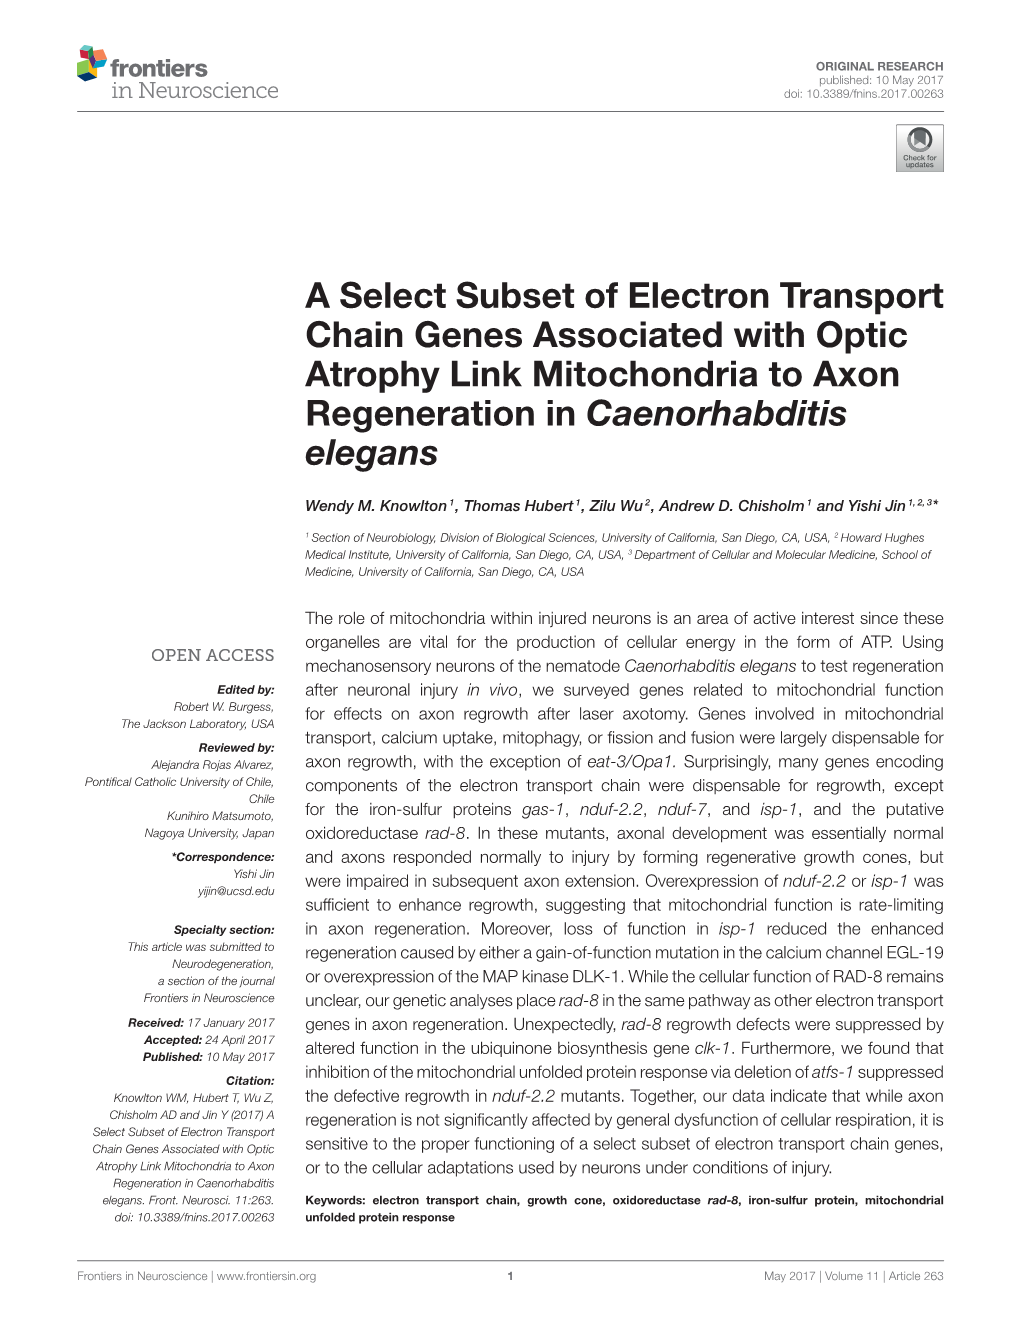 A Select Subset of Electron Transport Chain Genes Associated with Optic Atrophy Link Mitochondria to Axon Regeneration in Caenorhabditis Elegans